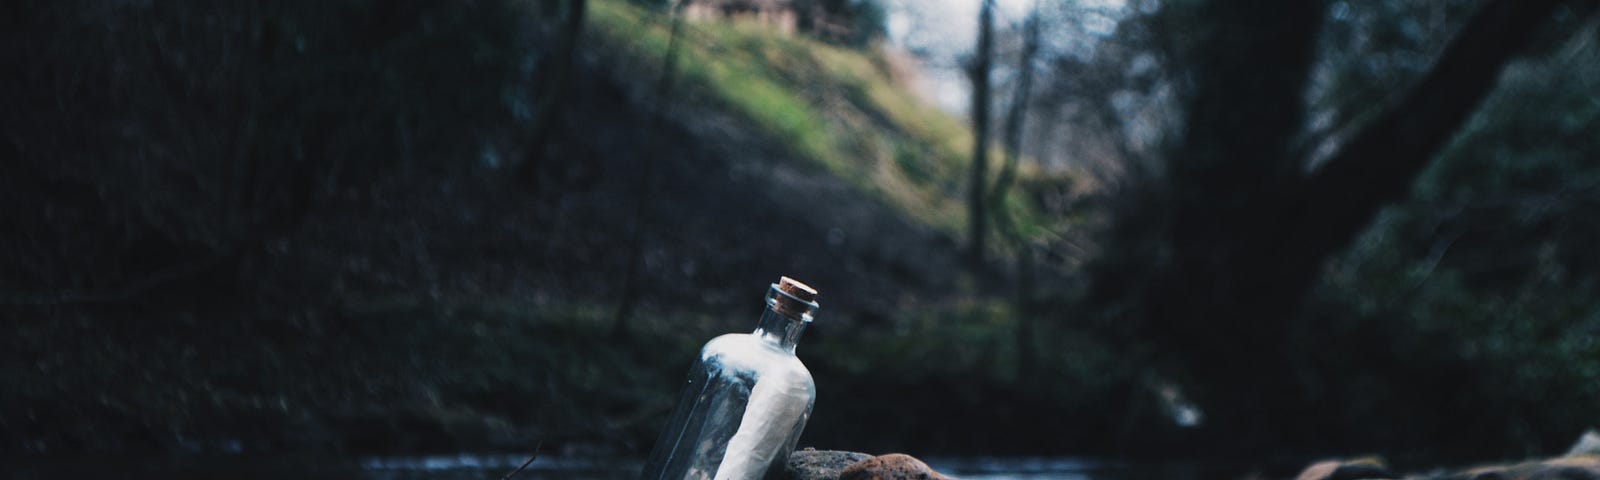 Bottle with a message inside floating in a river, symbolizing communication and connection through messages in water.